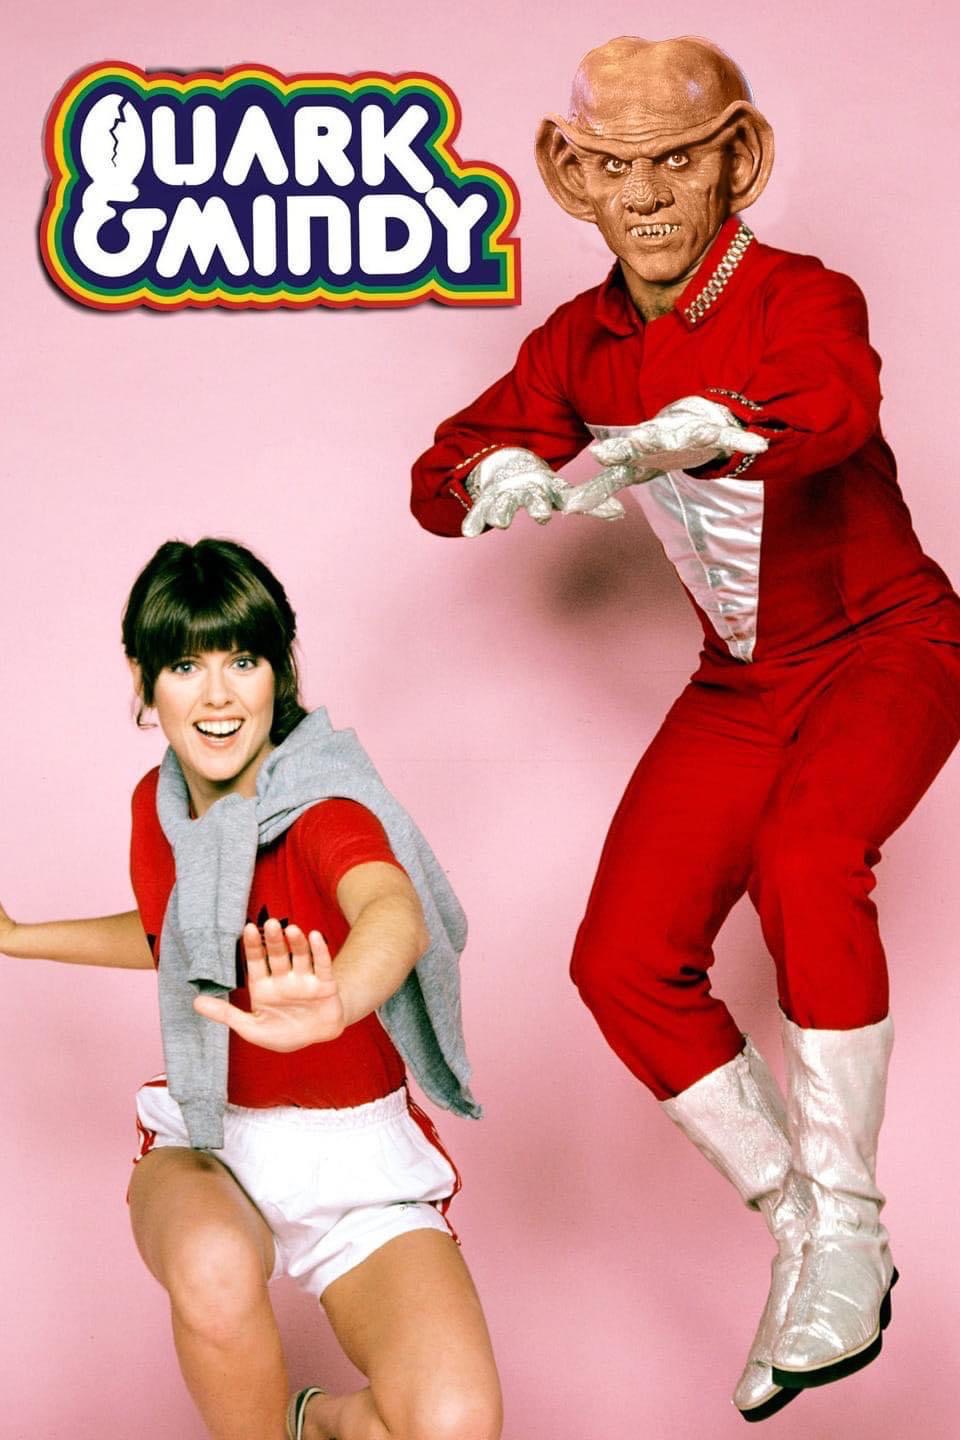 daily dose of pics and memes - mork and mindy mork - Quark &Mindy